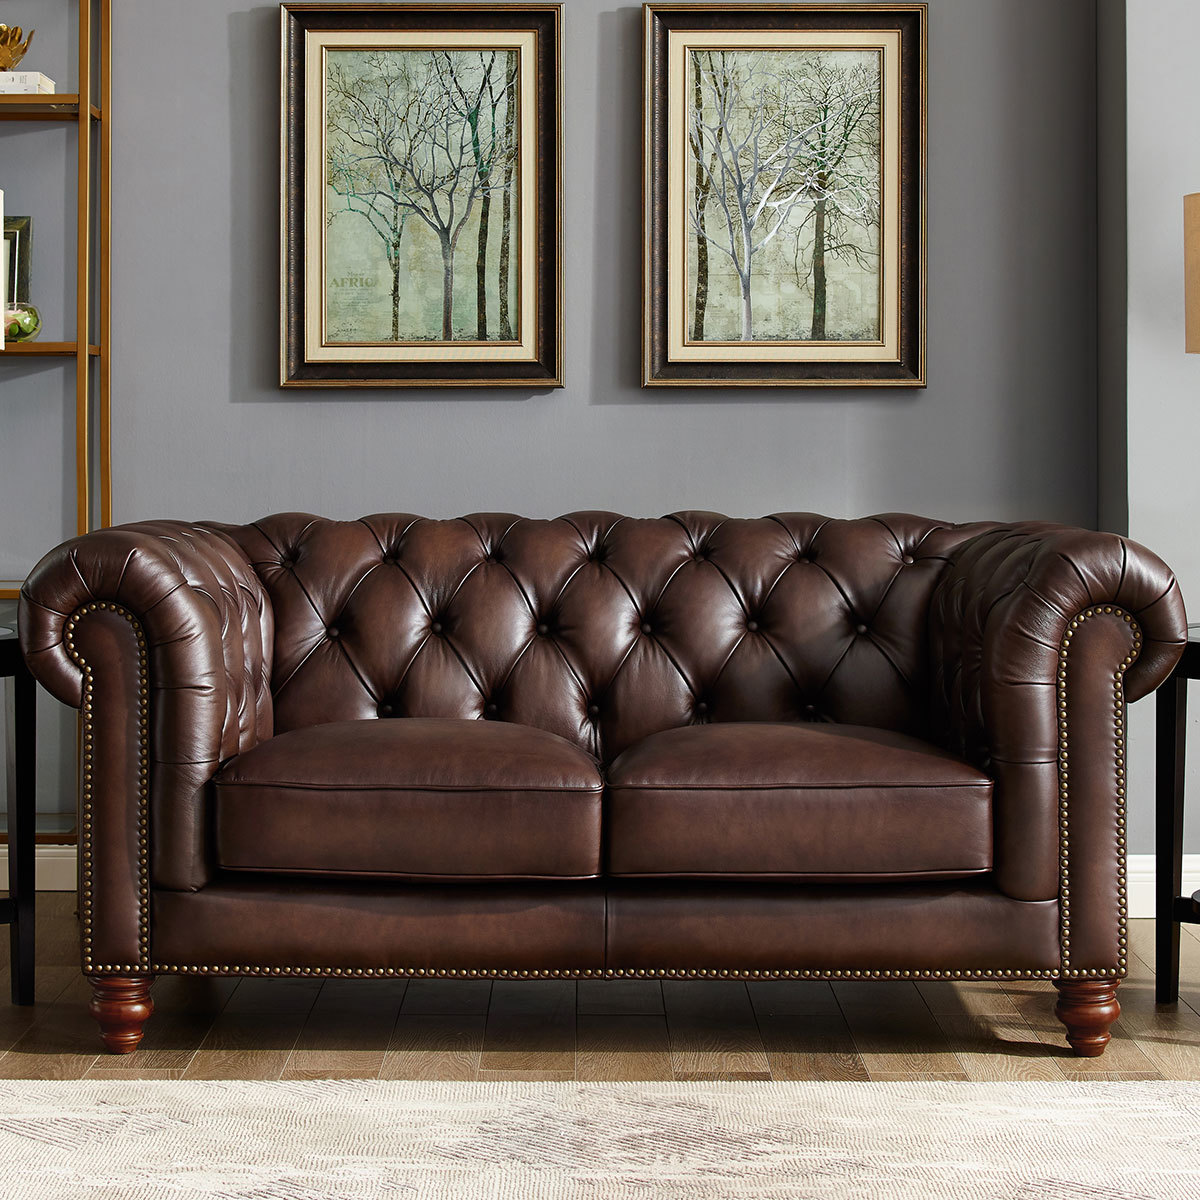 Allington 2 Seater Brown Leather, How To Date A Chesterfield Sofa